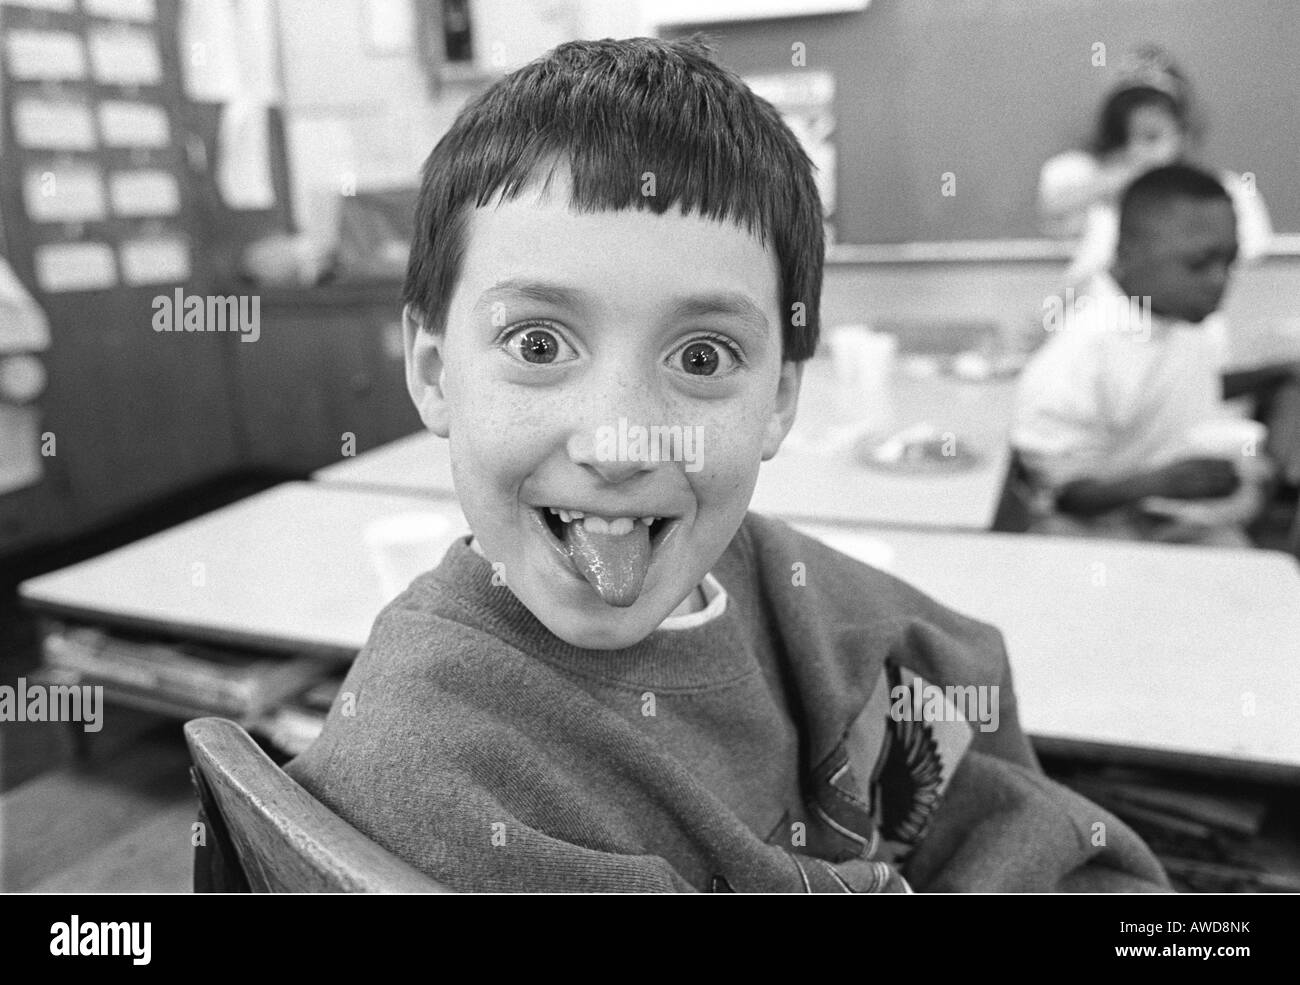 Elementary school child making a face for the camera Stock Photo